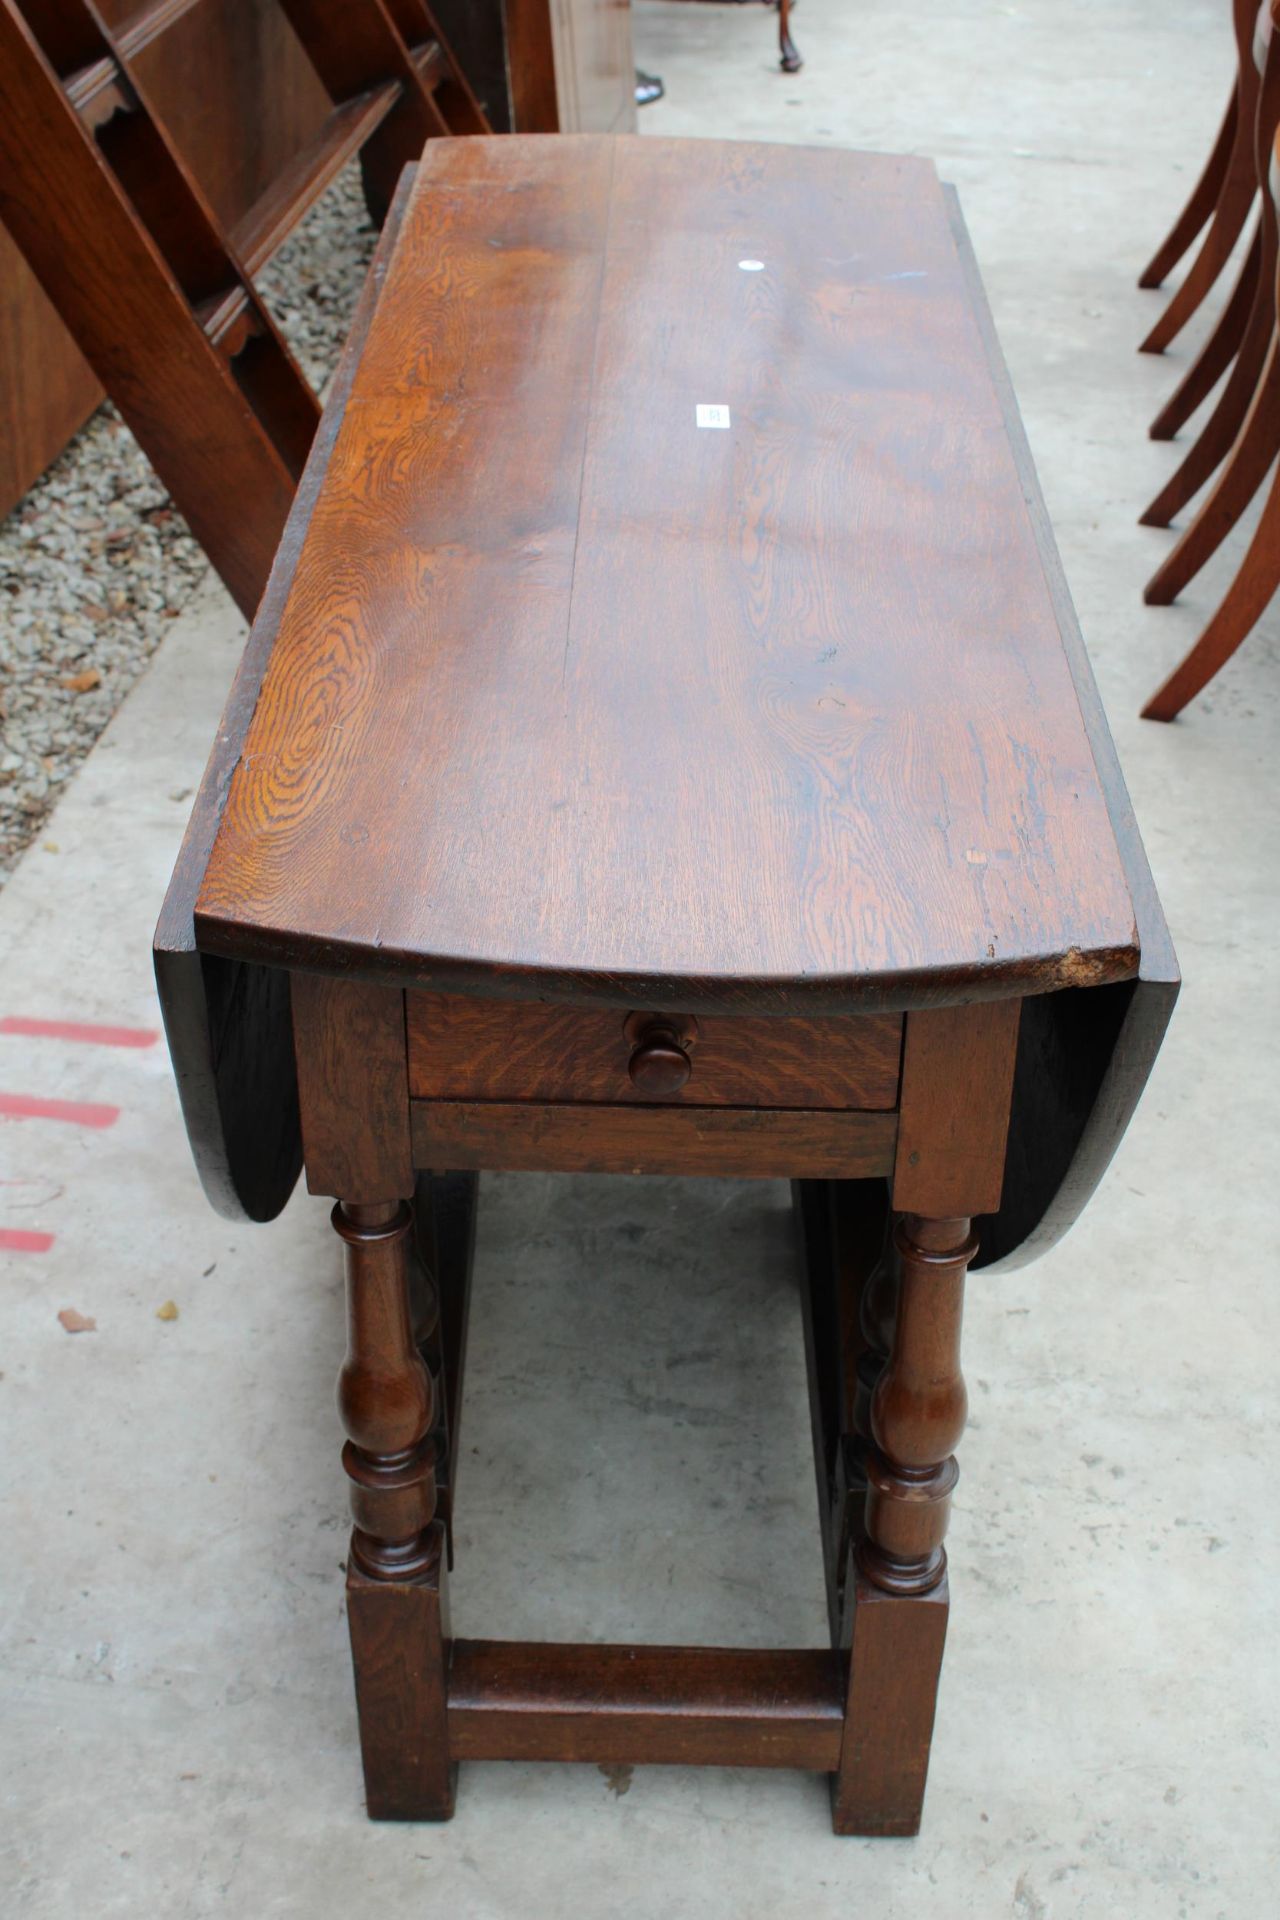 AN OAK GEORGE III OVAL GATE LEG DINING TABLE WITH TWO DRAWERS ON TURNED LEGS 59" X 53" OPENED - Image 6 of 6